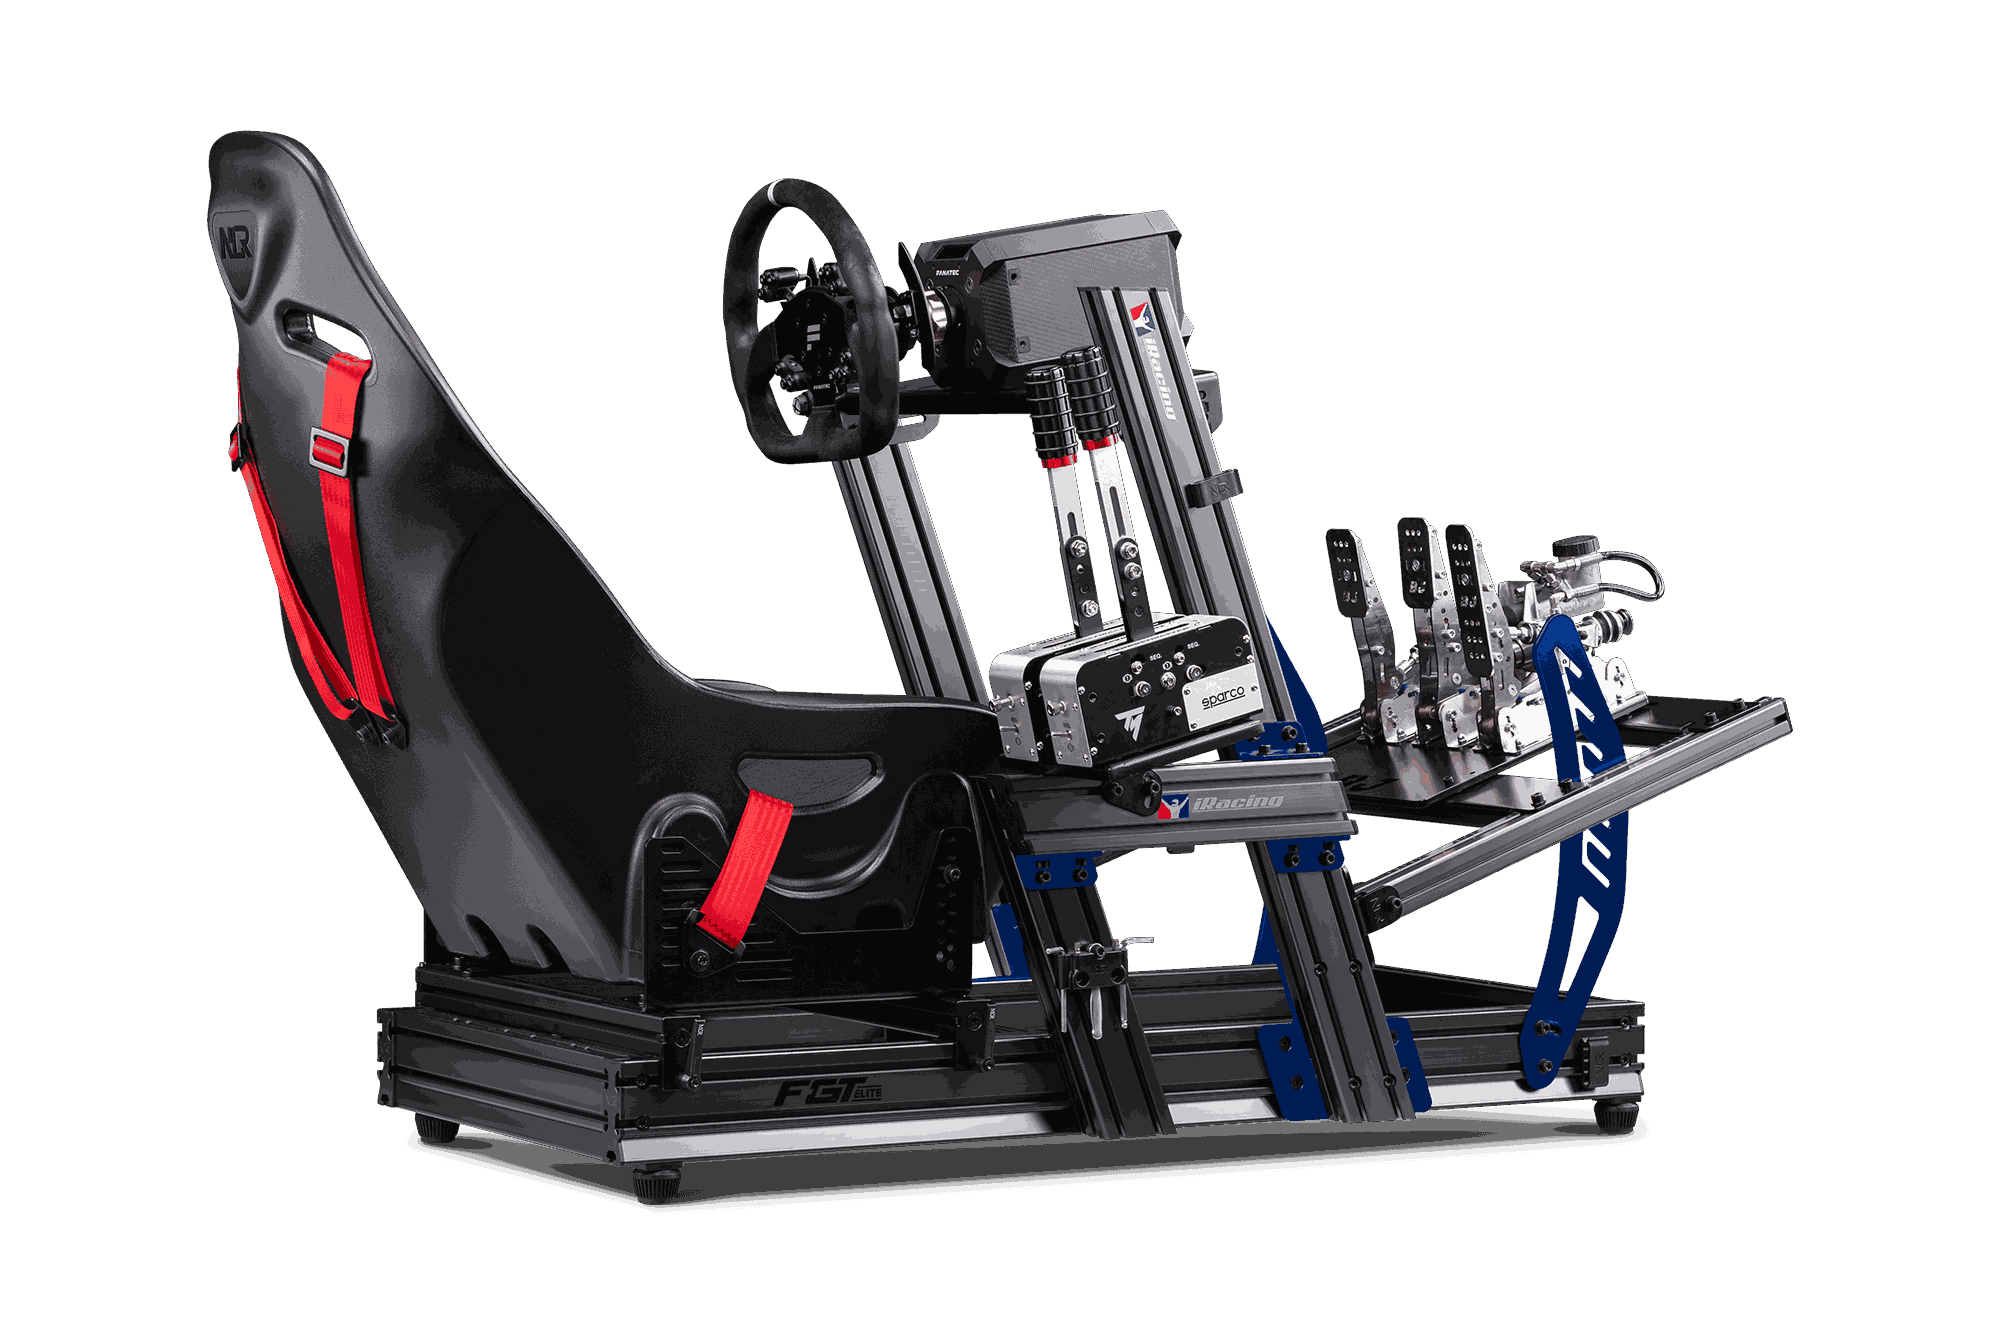 Next Level Racing. Next Level Racing traction Plus Motion Plattform. Racing Level. Next Level Racing Driving Force Shifter Lite Review.